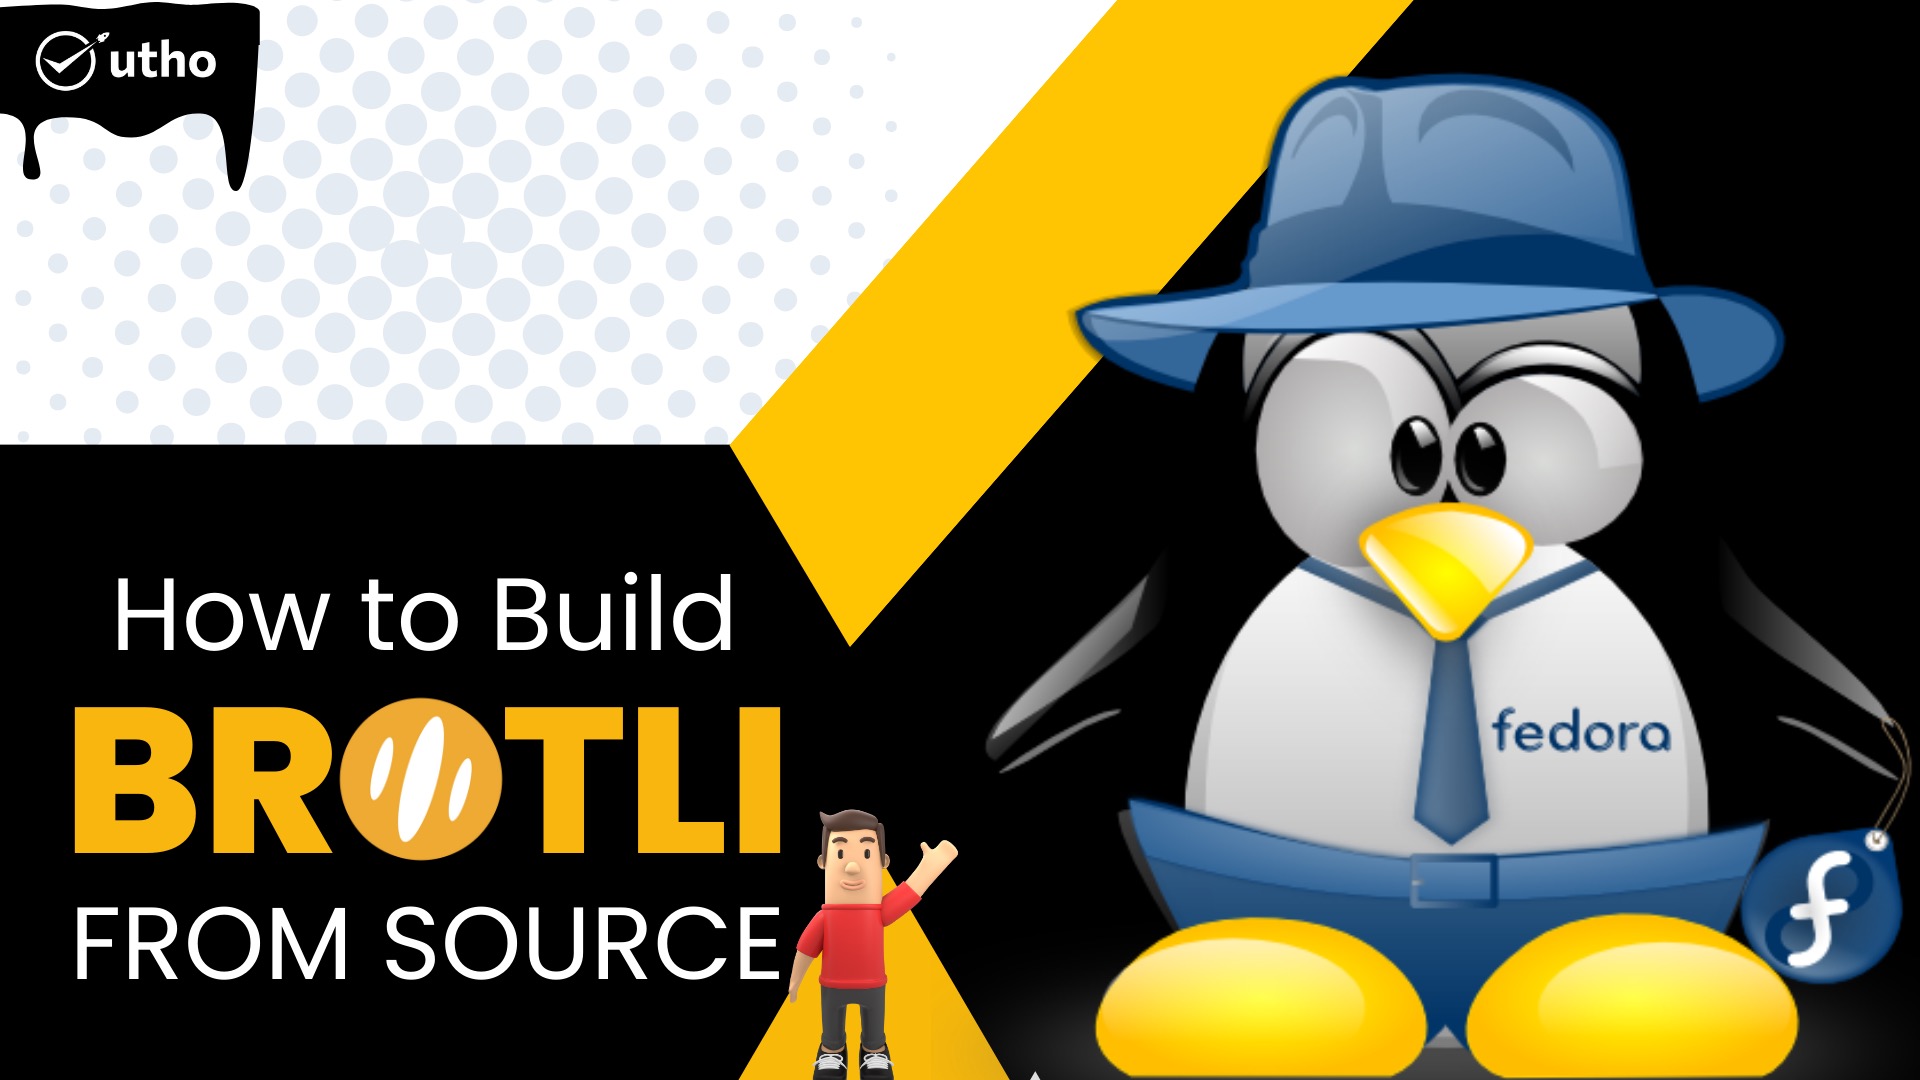 How to Build Brotli From Source on Fedora